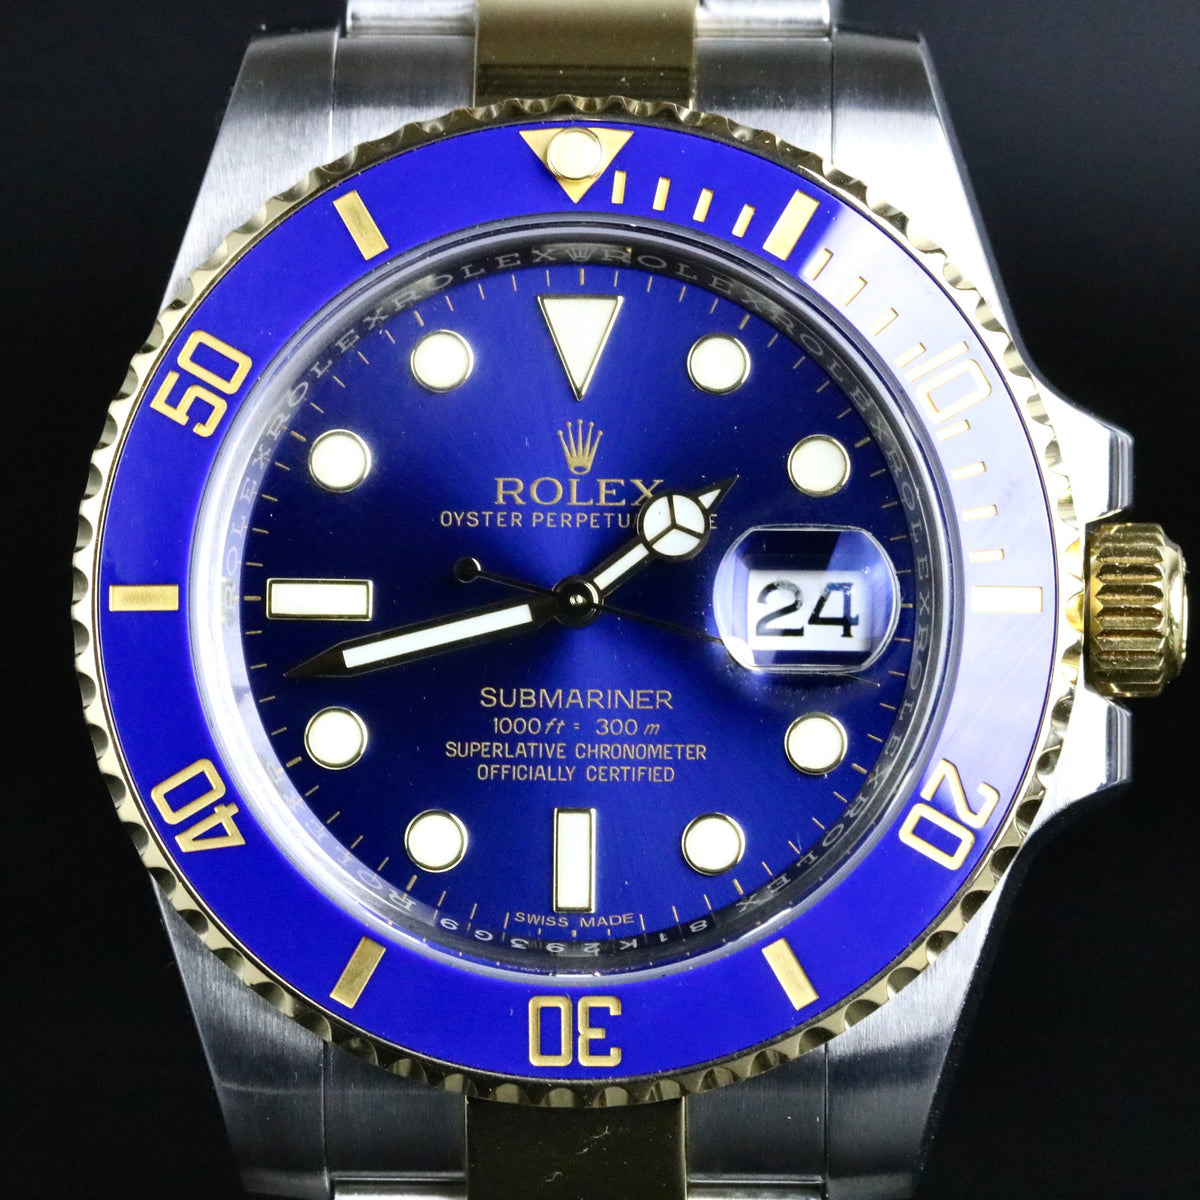 2017 Rolex 116613LB Submariner 40mm Blue Ceramic Bezel with Box & Papers